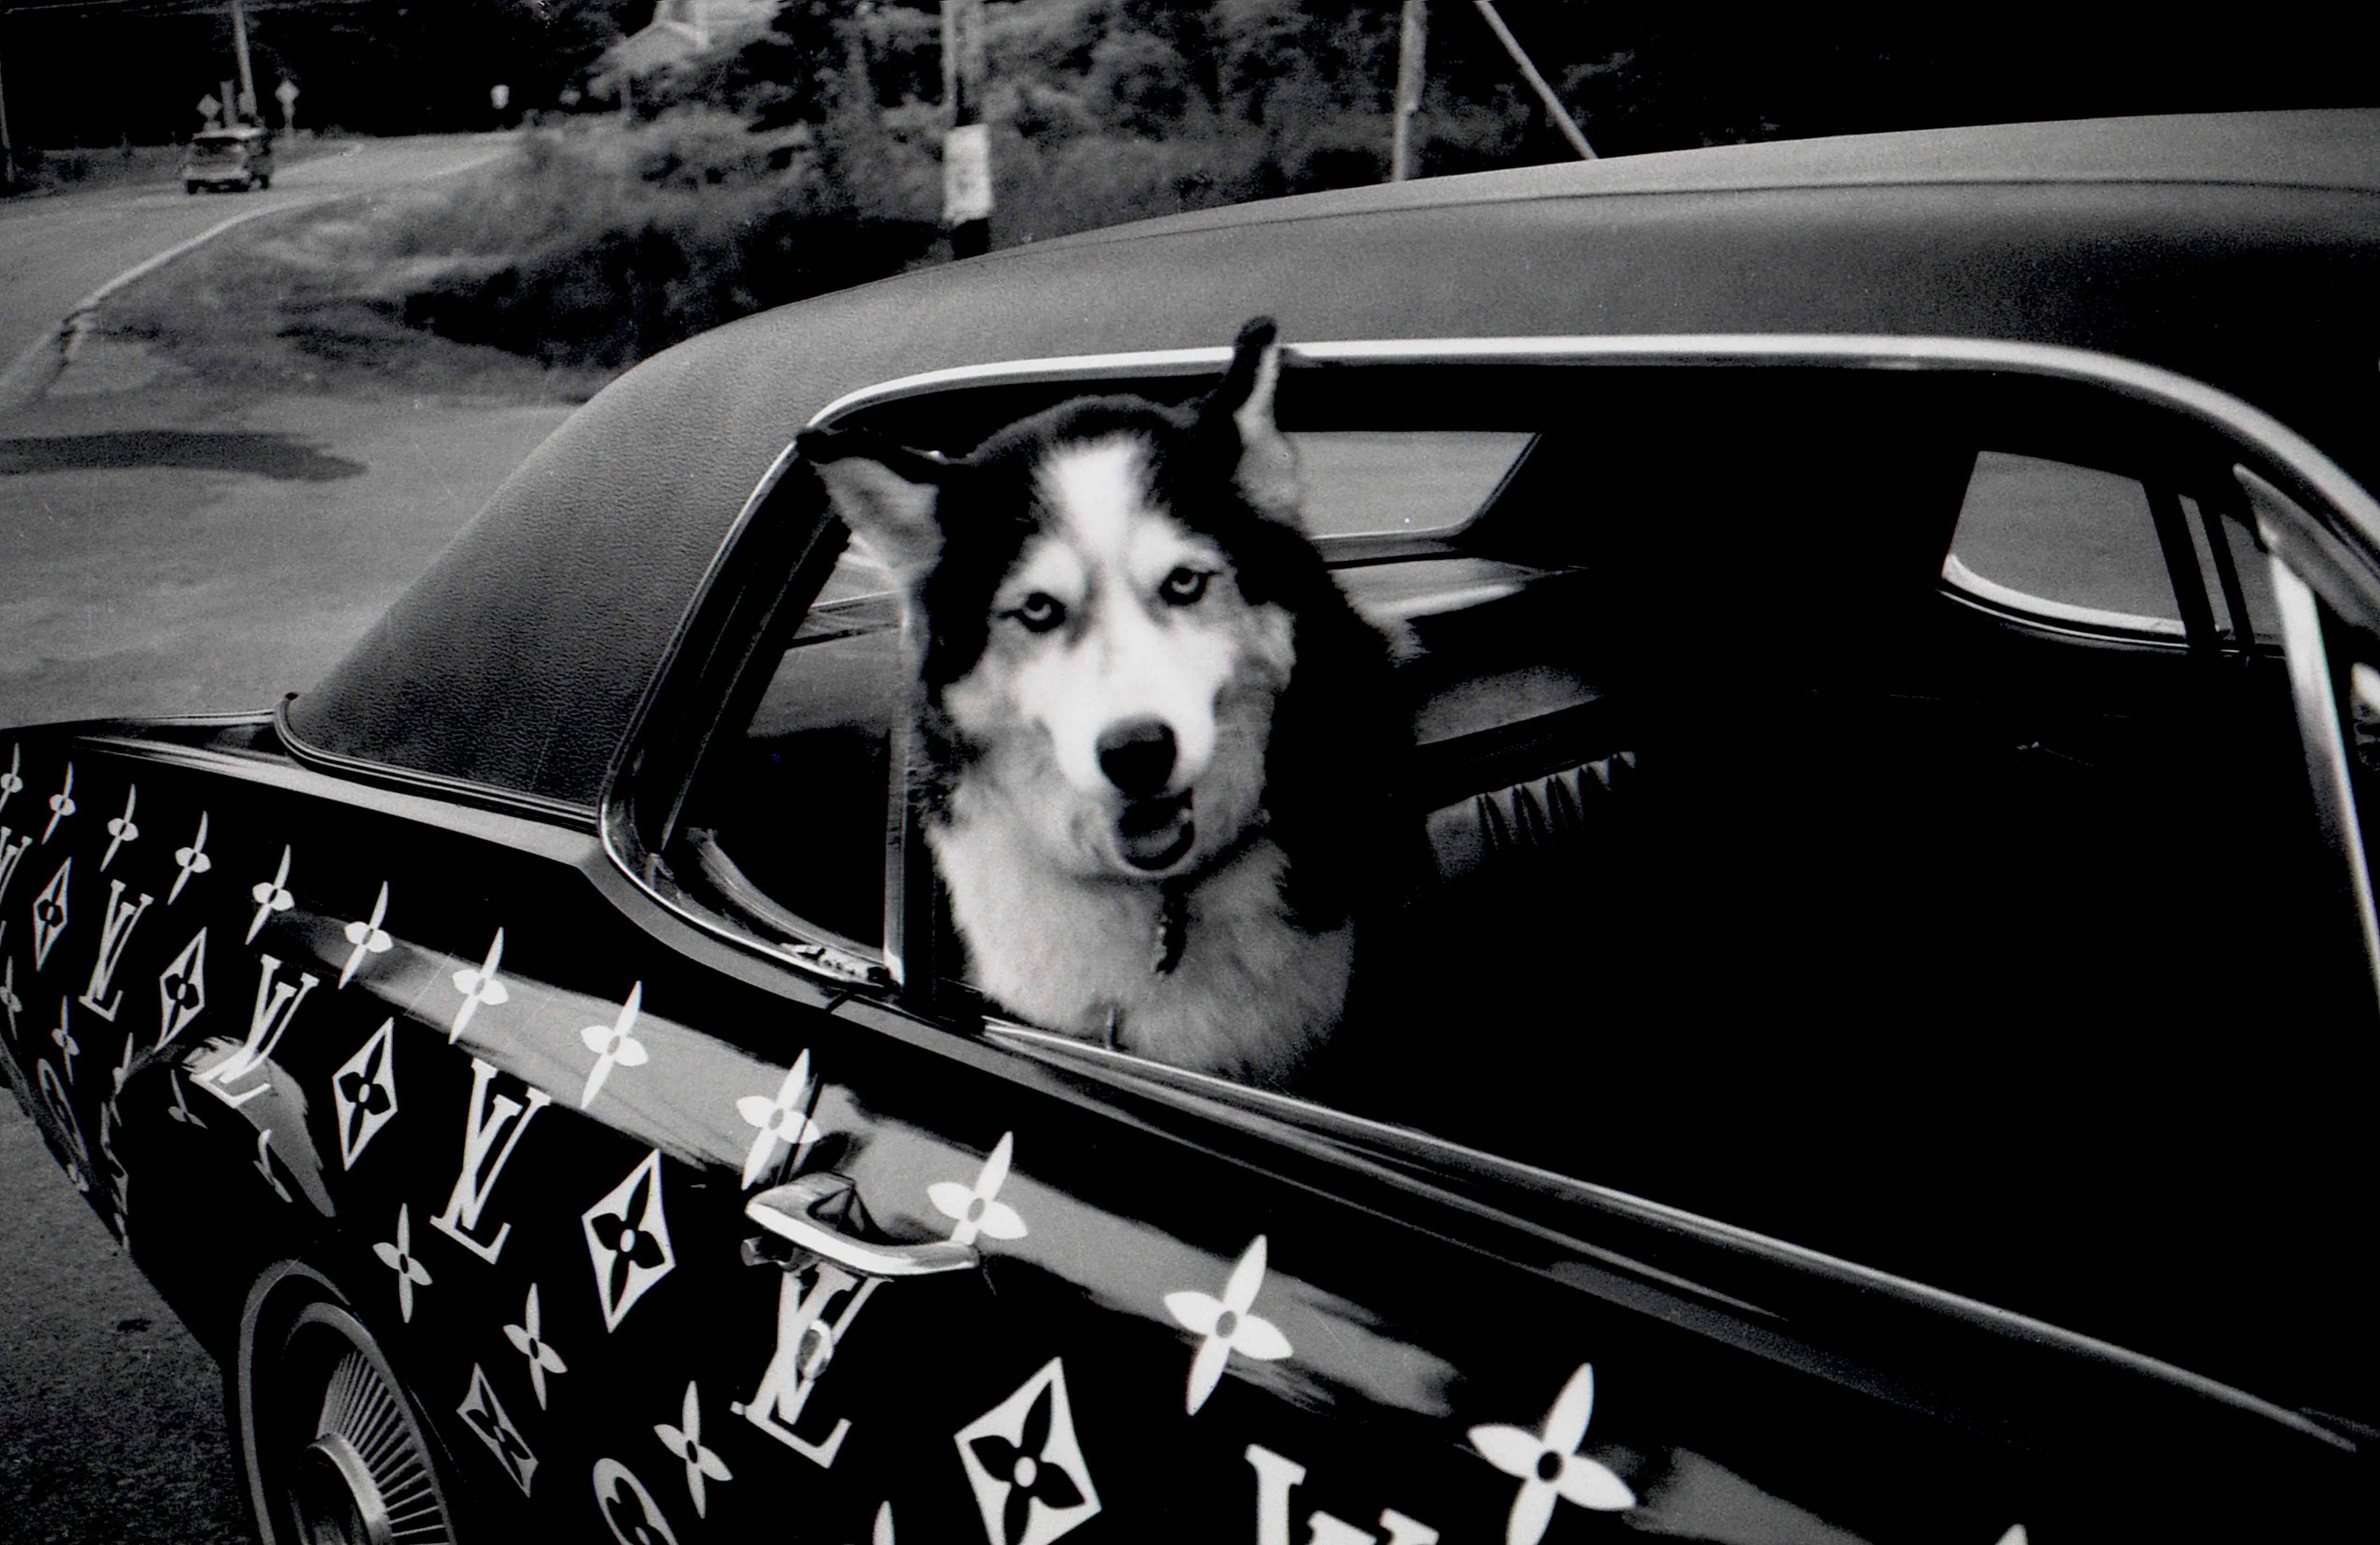 Ricky Powell Black and White Photograph - Louis Vuitton Dog